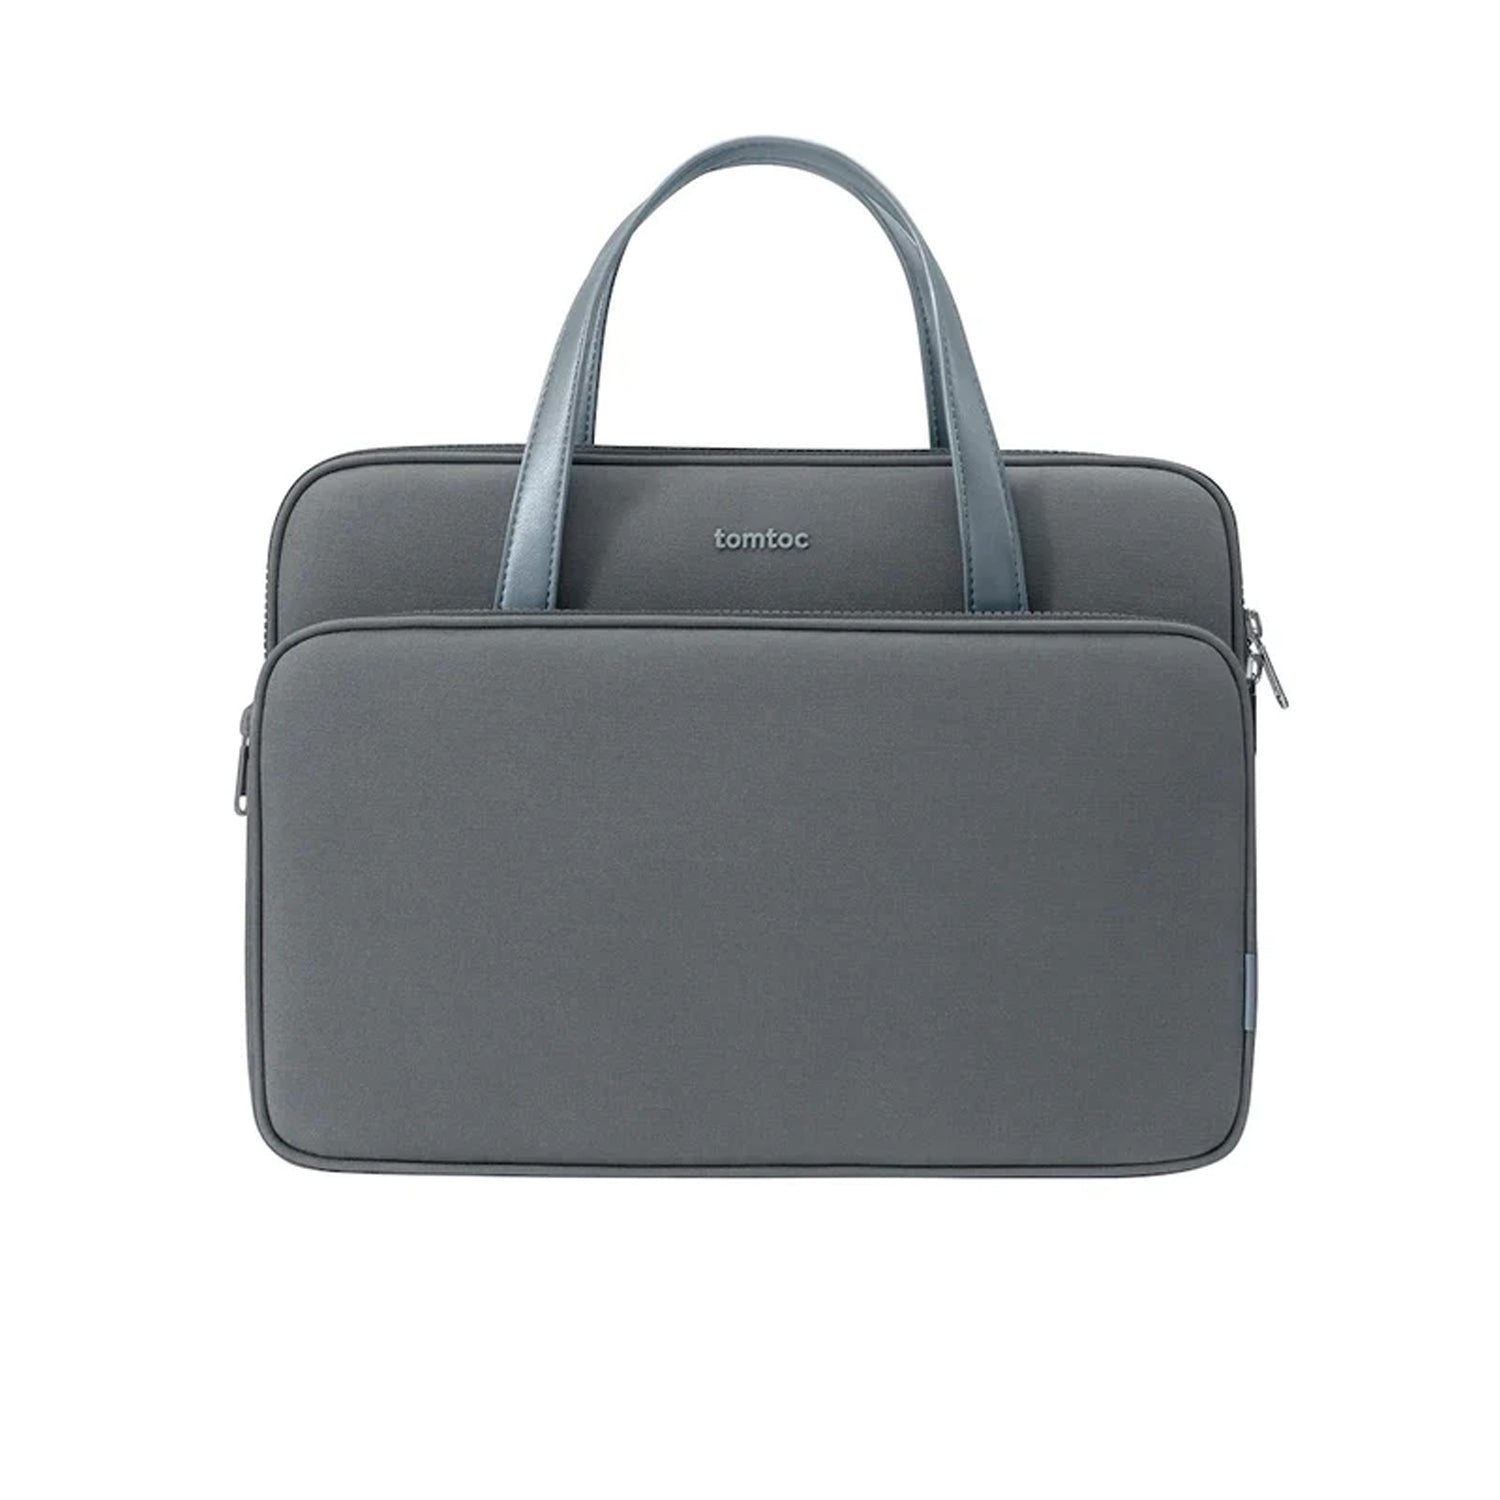 Tomtoc Her Series H21 Laptop Handbag for Up to 14-Inch MacBook Pro